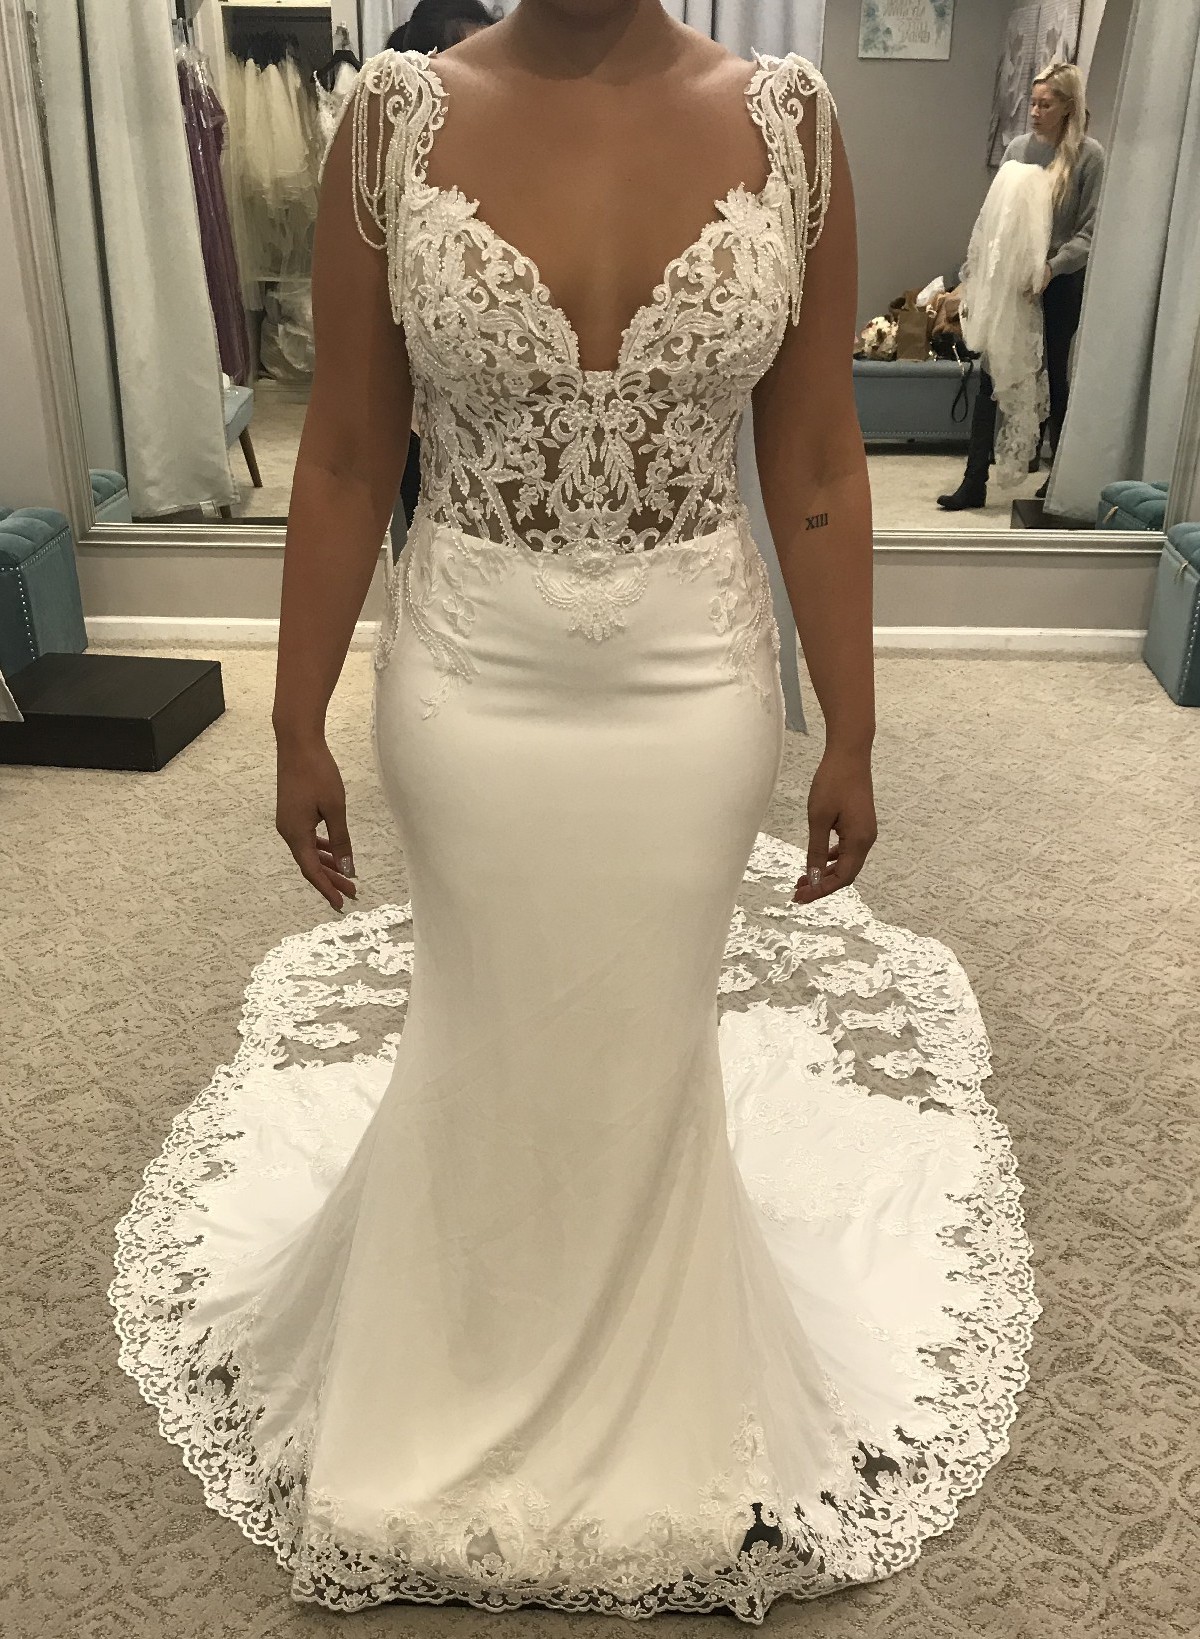 large size dresses to wear to a wedding